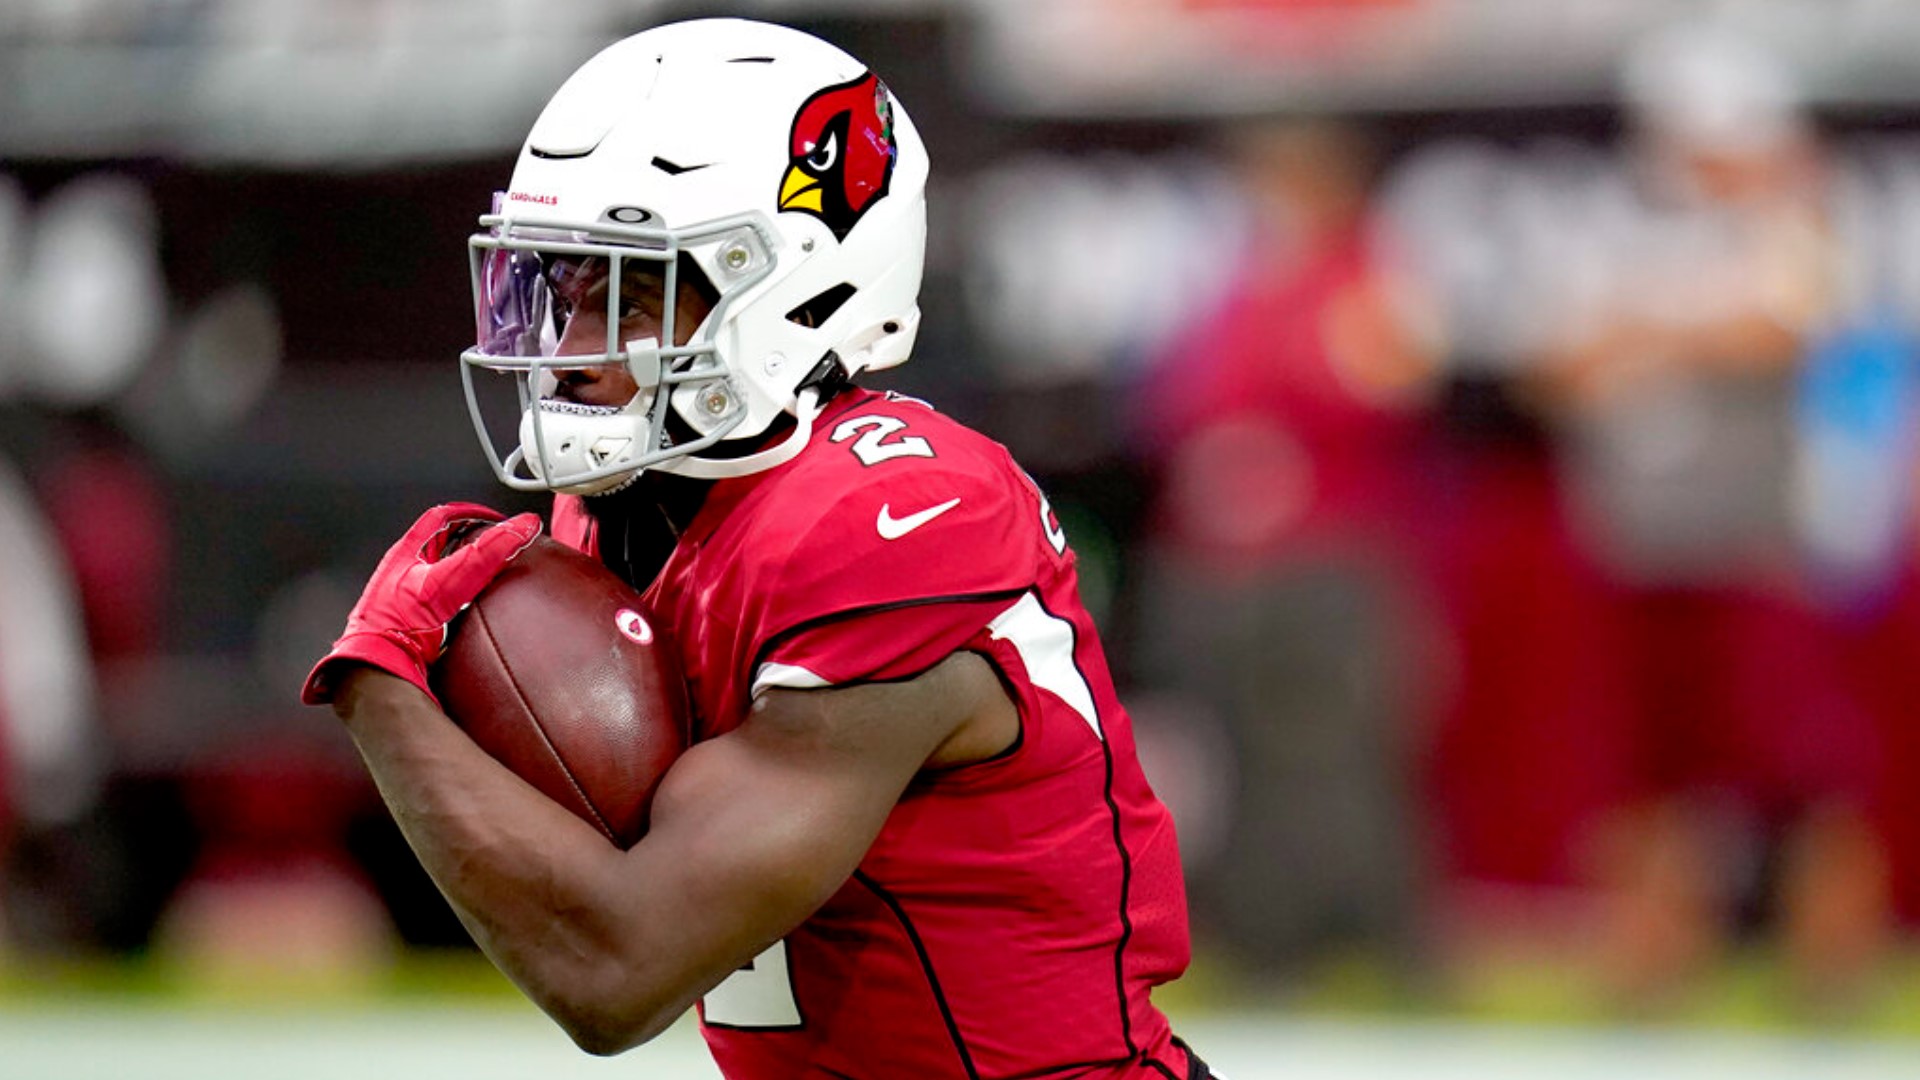 Things to watch for in the Cardinals final preseason game of 2021 | 12news.com